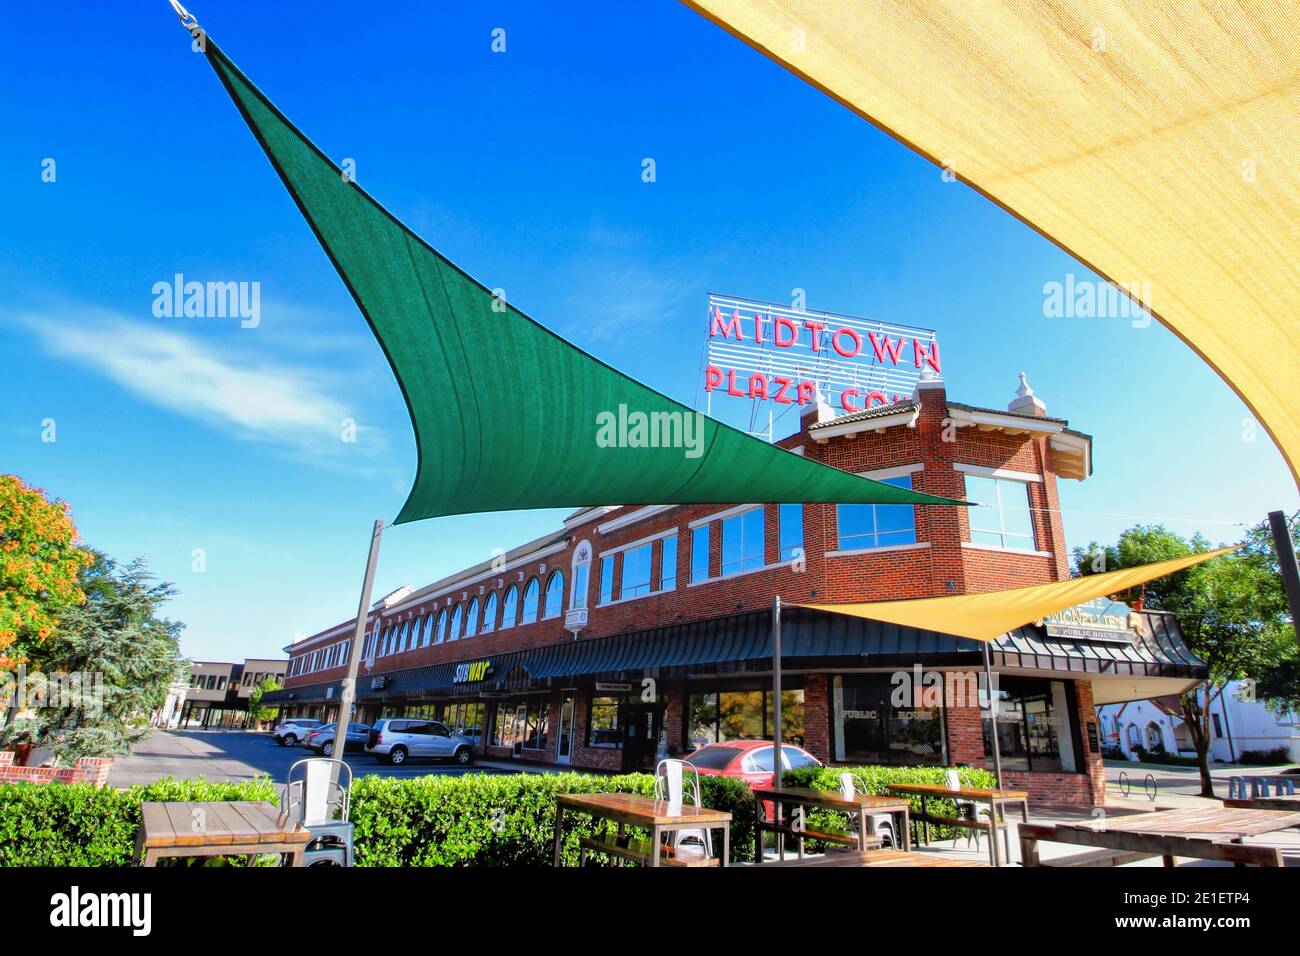 Looking out at Oklahoma City's Midtown Plaza Court from under sun shade awnings. Stock Photo